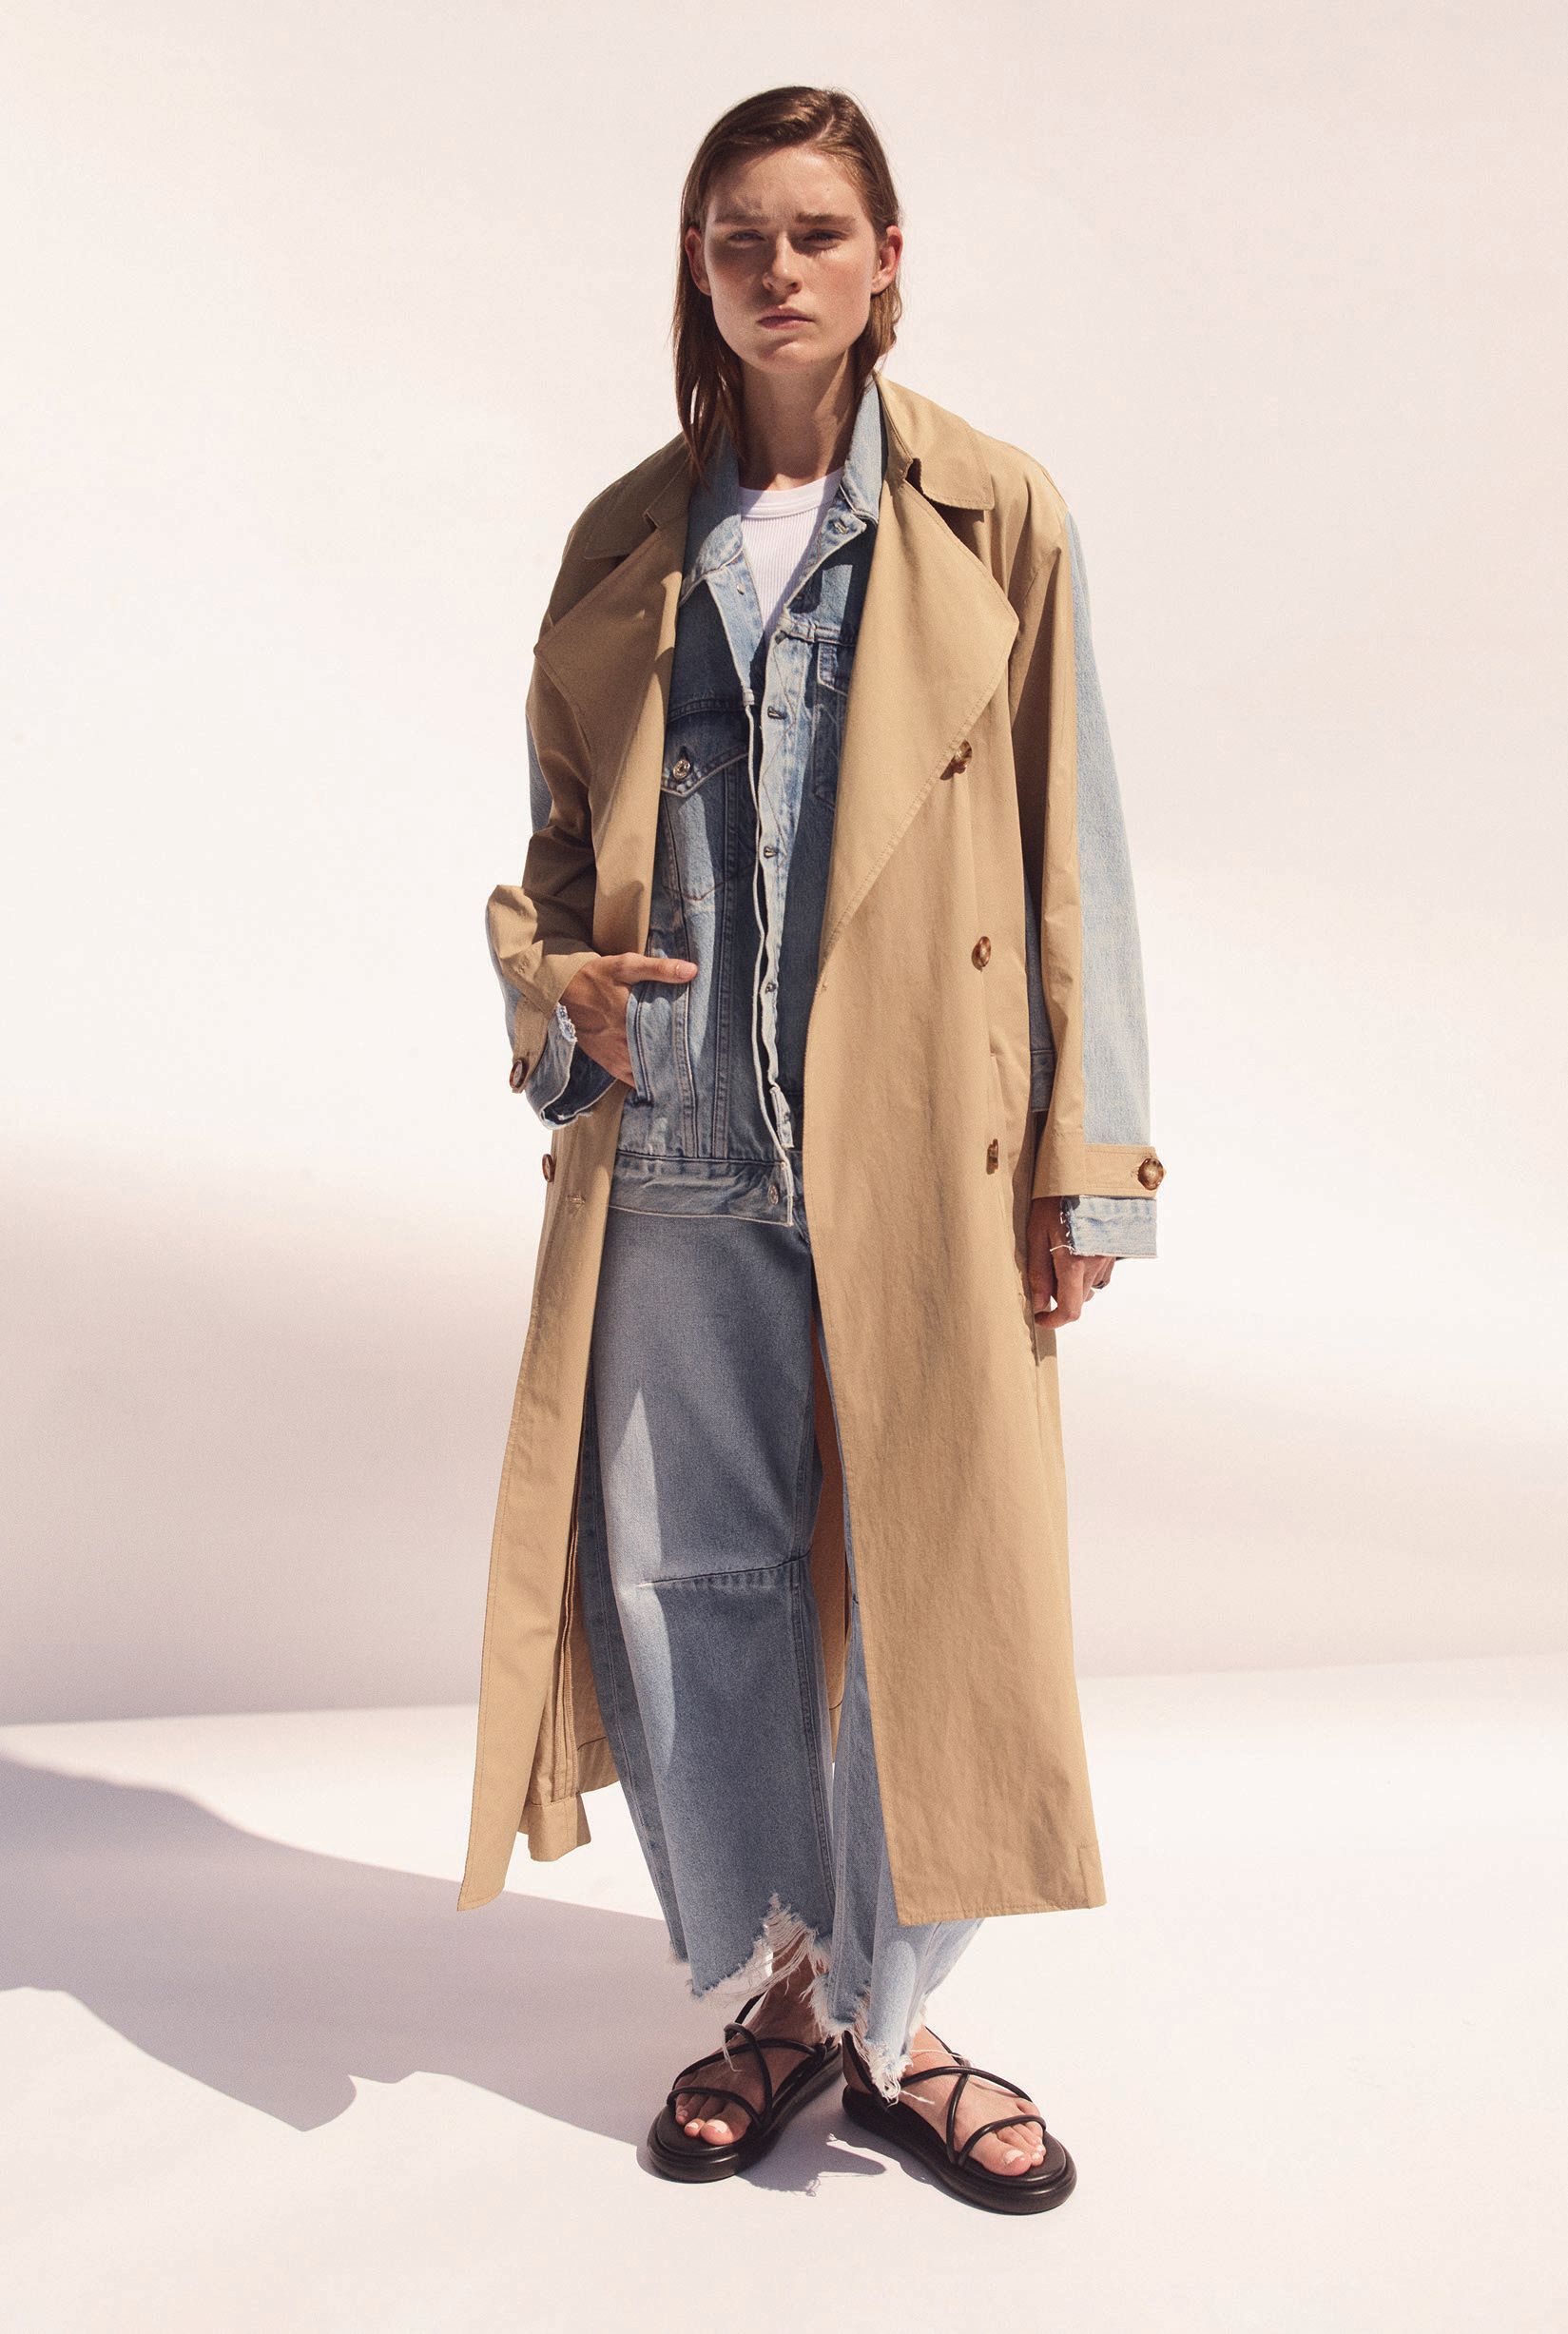 Spliced trench in Splice paired with the Horseshoe jean in Savahn PHOTO COURTESY OF CITIZENS OF HUMANITY